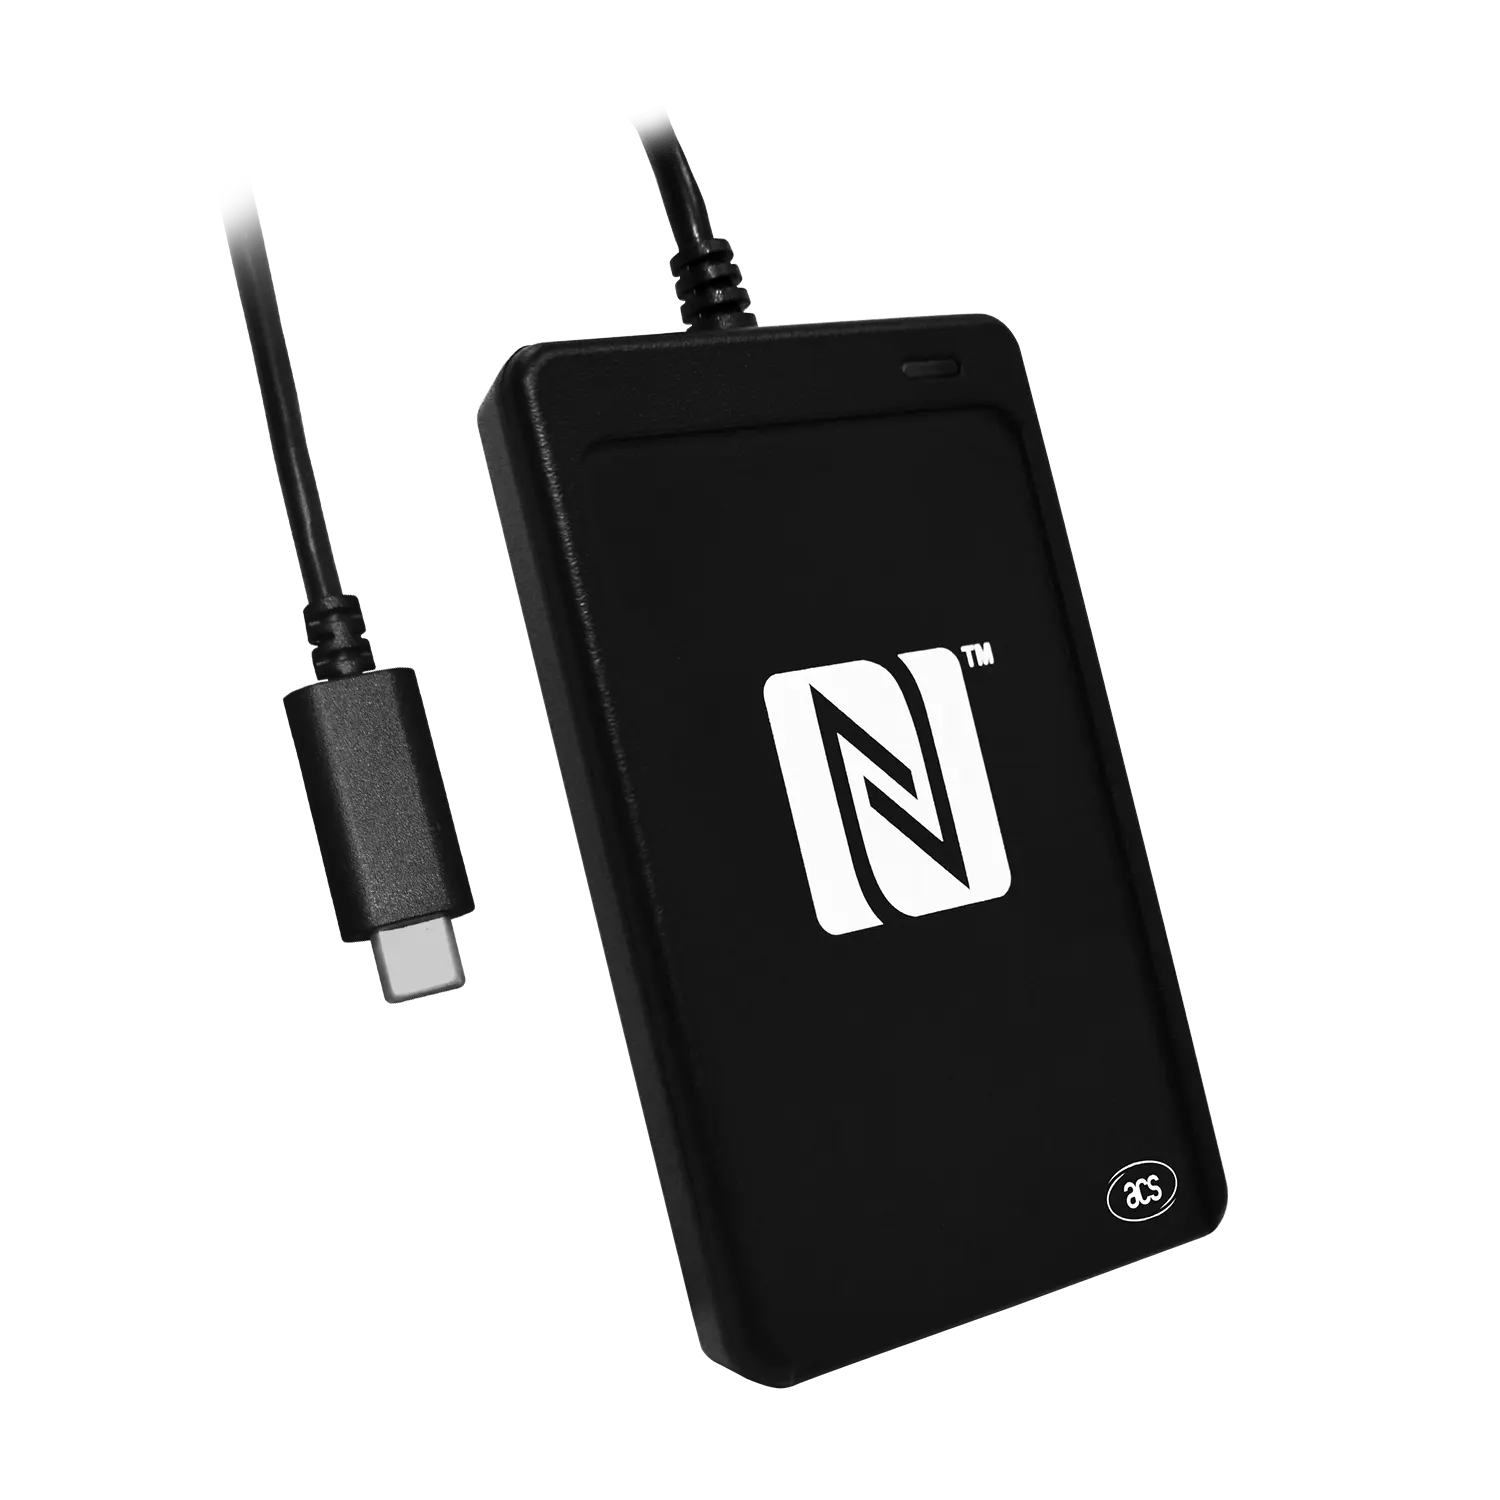 NFC 13.56Mhz Module USB Android RFID Smart Card Reader and Writer Machine